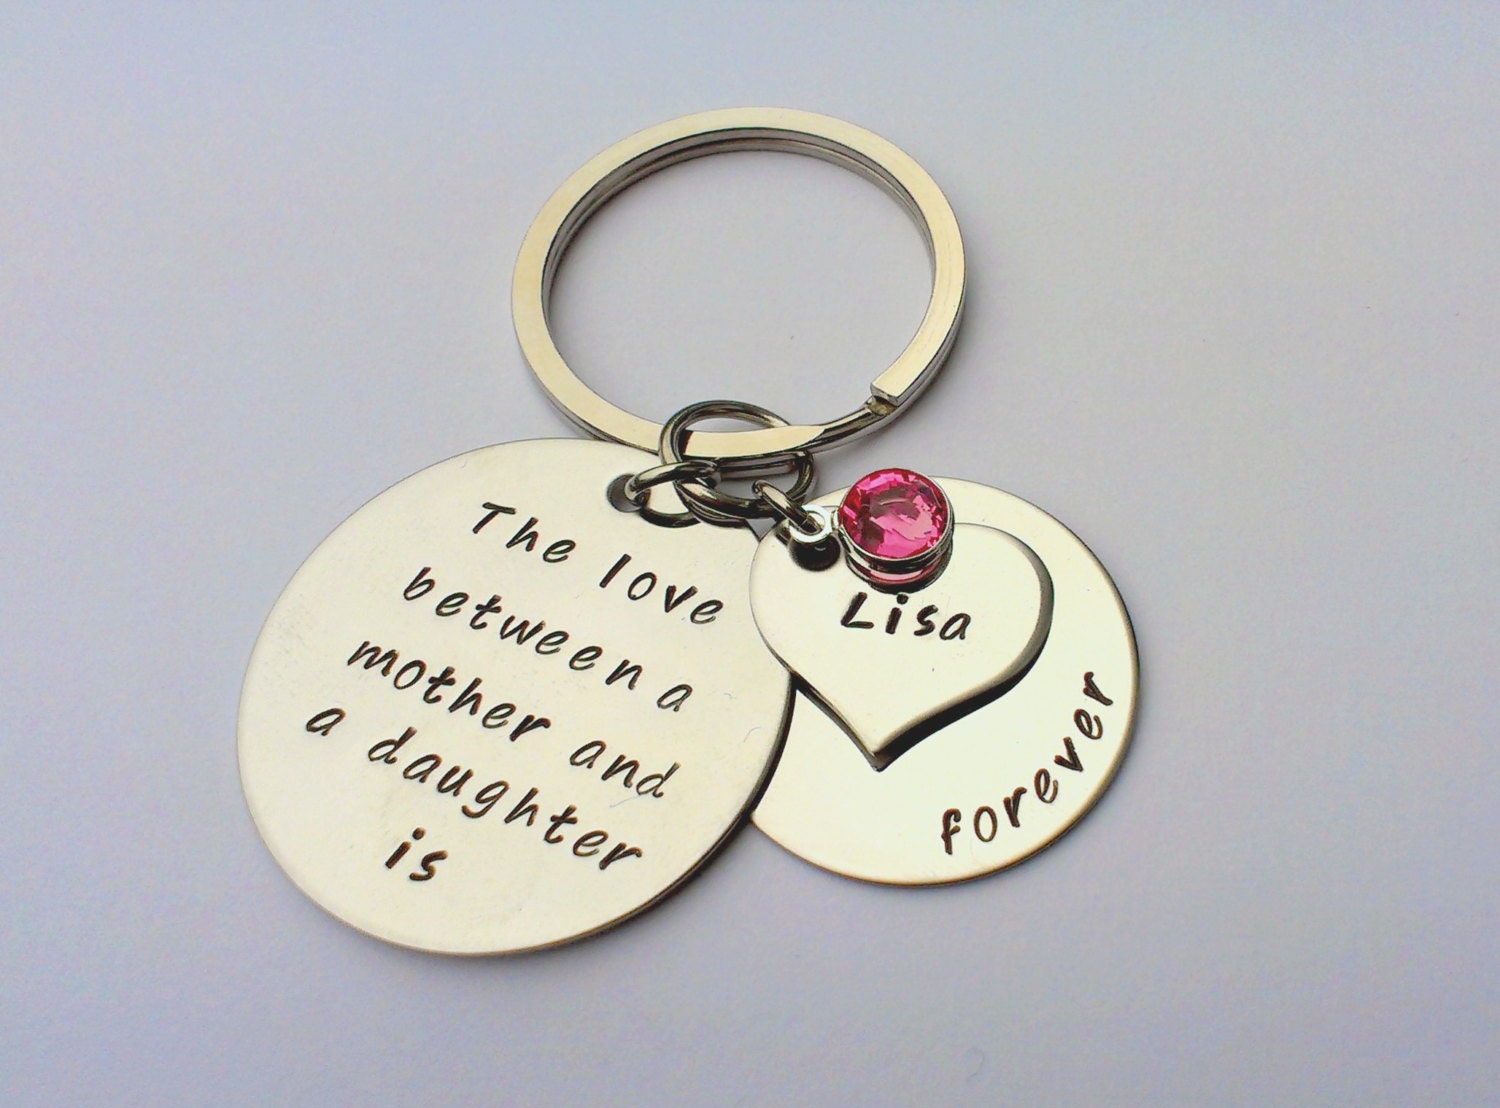 Personalised mother daughter gift - personalised gift for mum - personalised gift for daughter - personalised keyring, birthday gift for mum